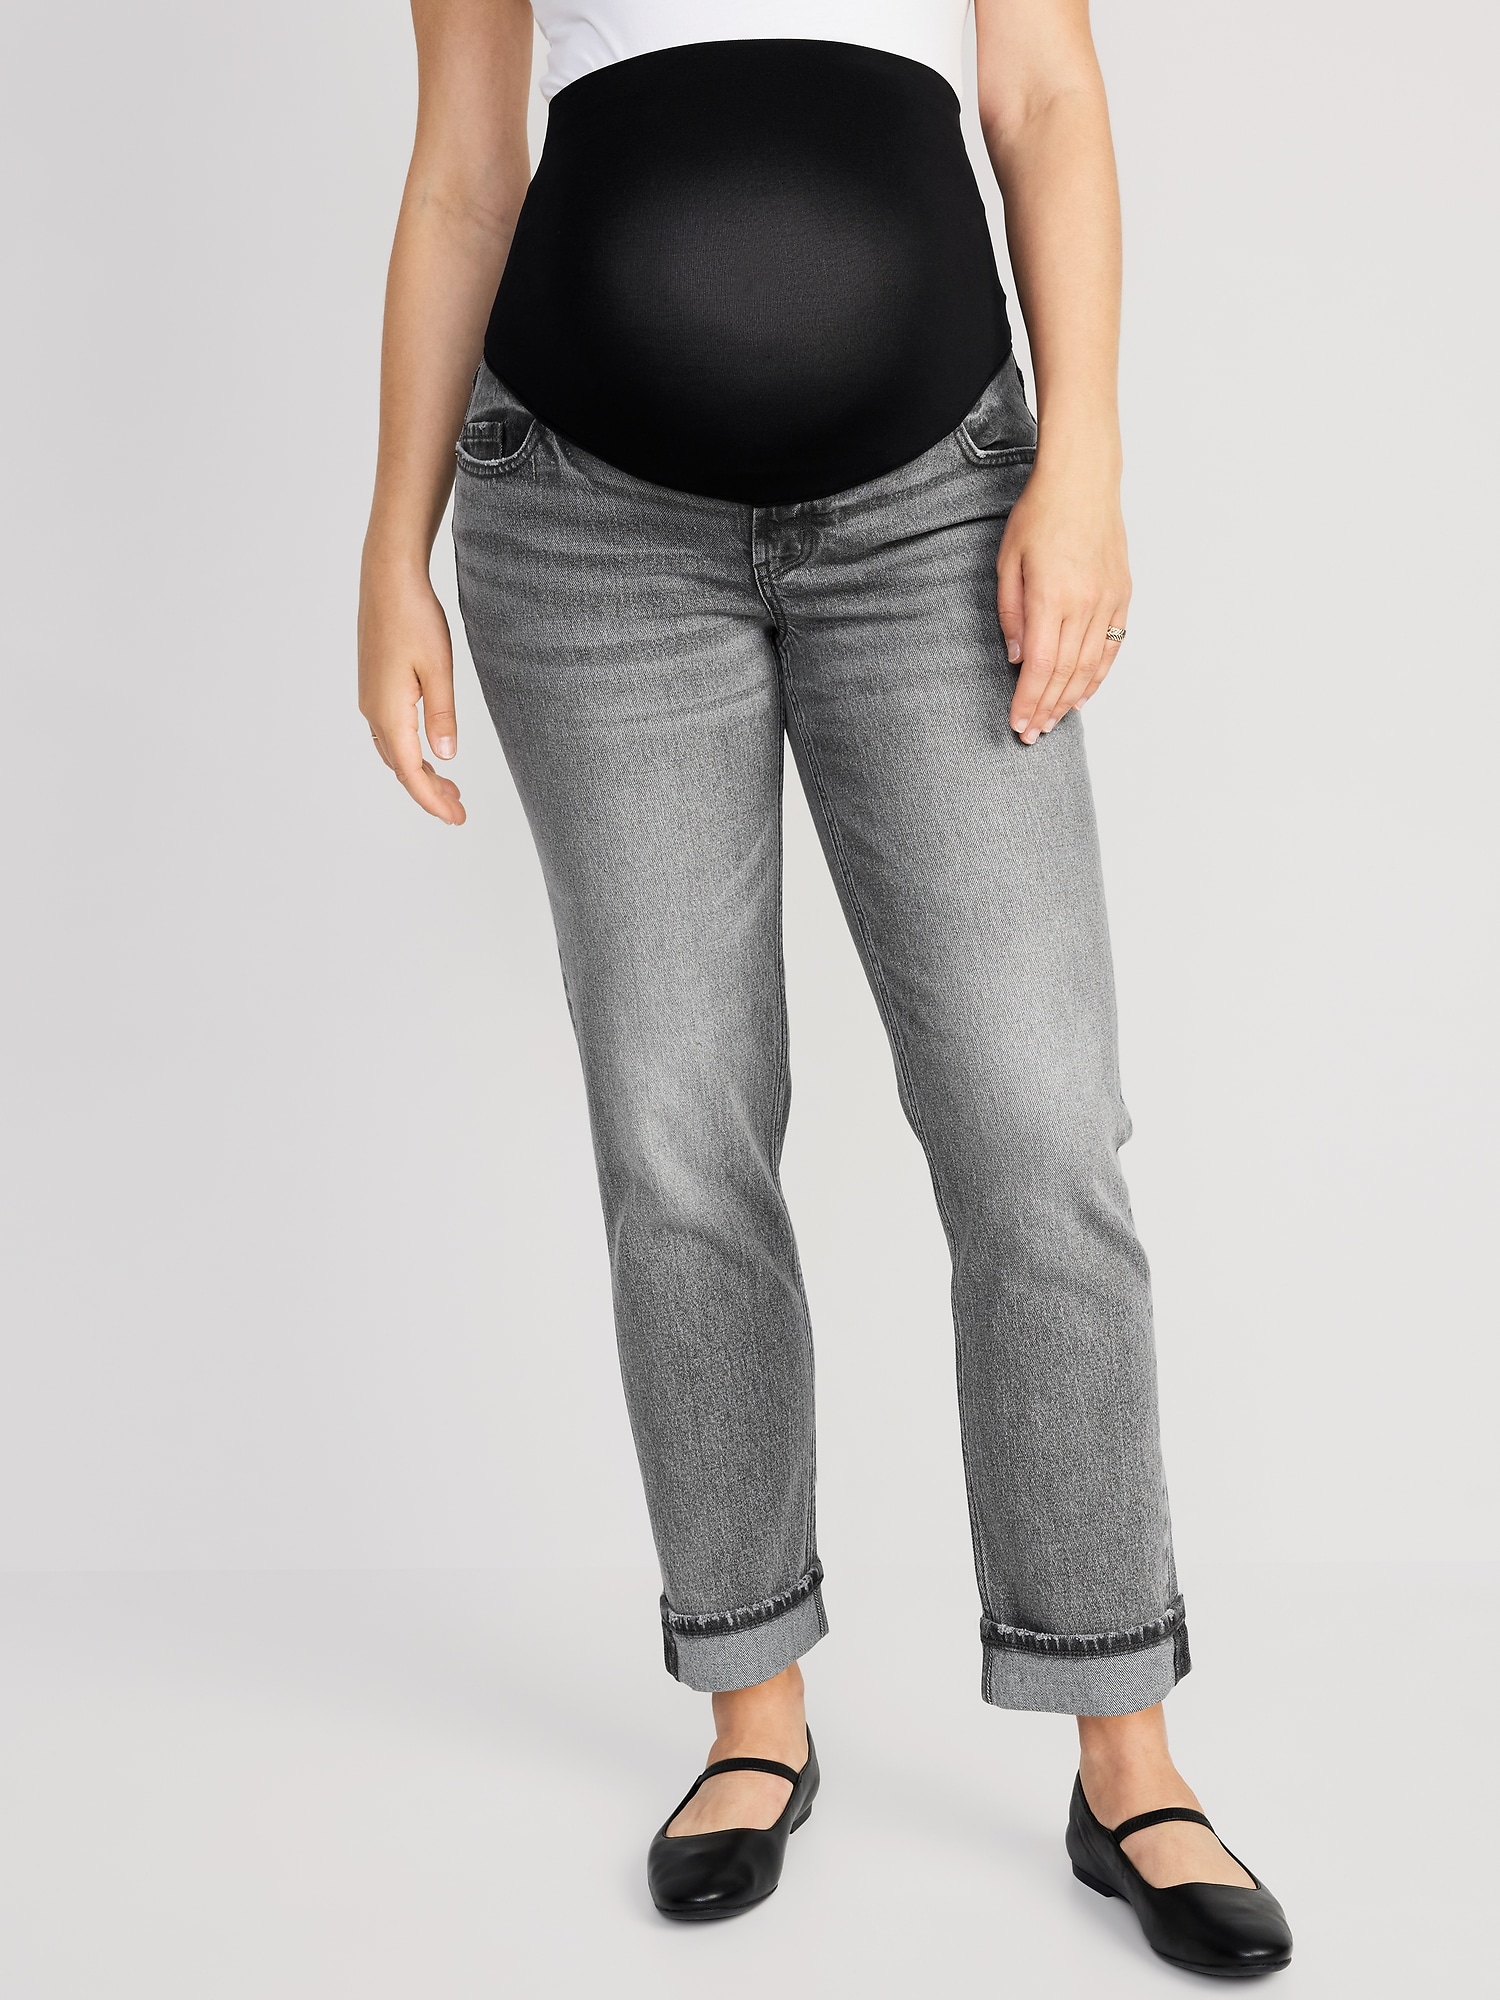 Jeans that fit while pregnant?? Yes please!👖💕 Use code: kamill1 for